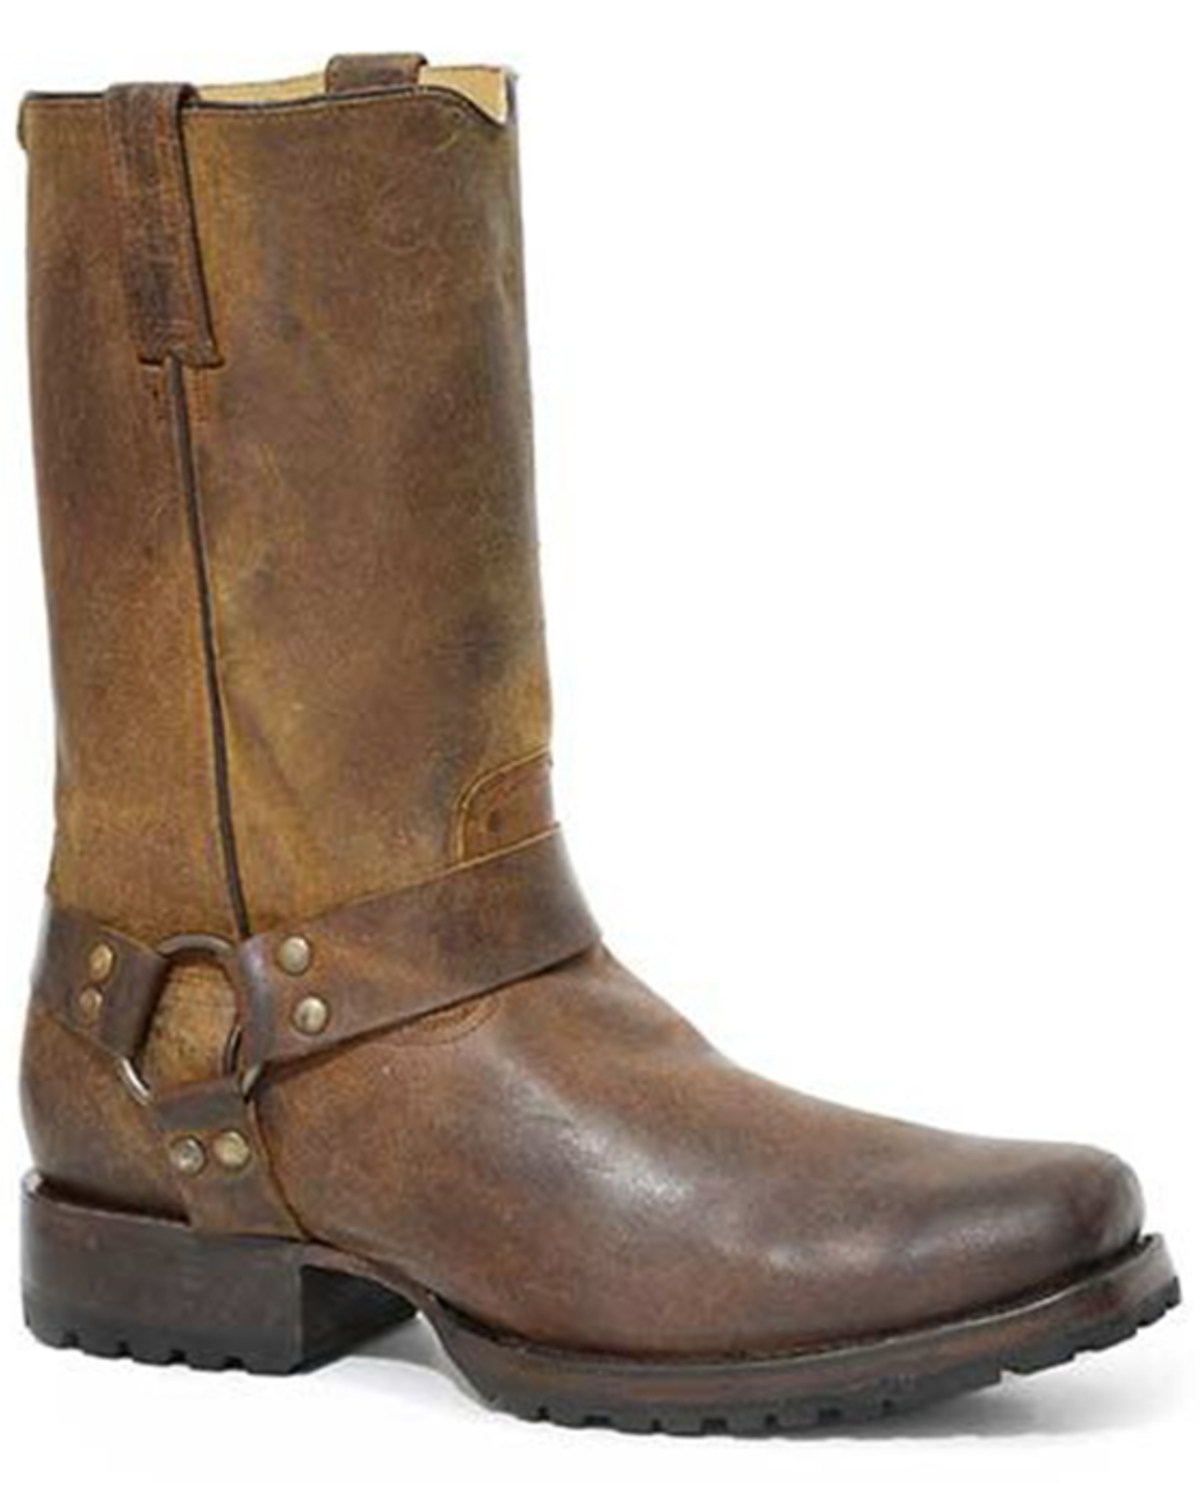 Stetson Men's Heritage Harness Pull On Moto Boots - Square Toe